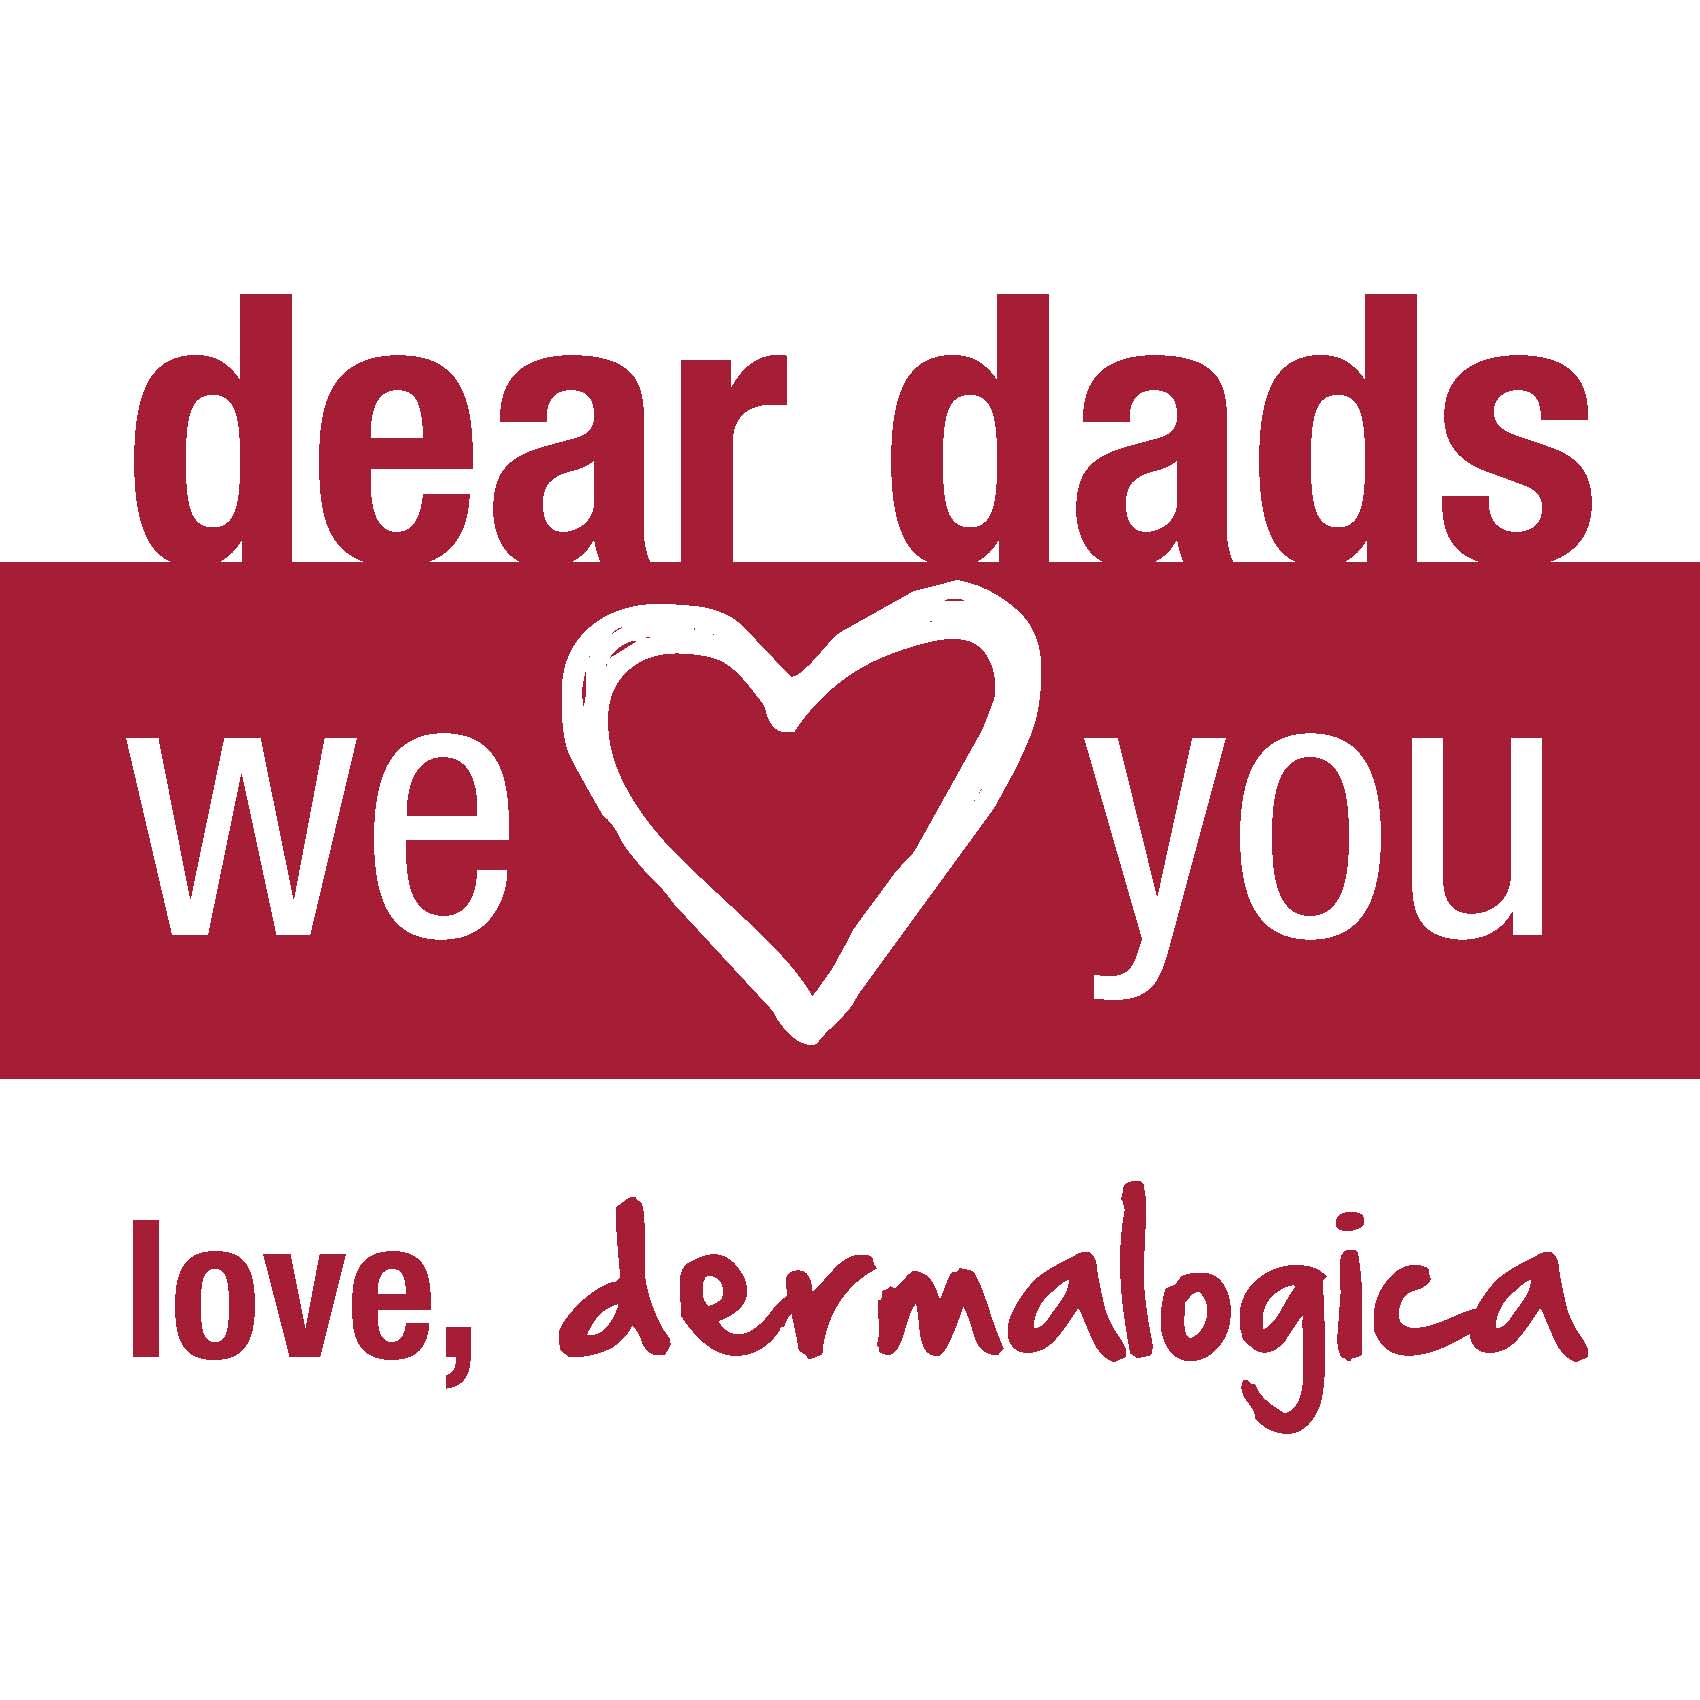 Don’t forget Fathers Day – Sunday 21st June